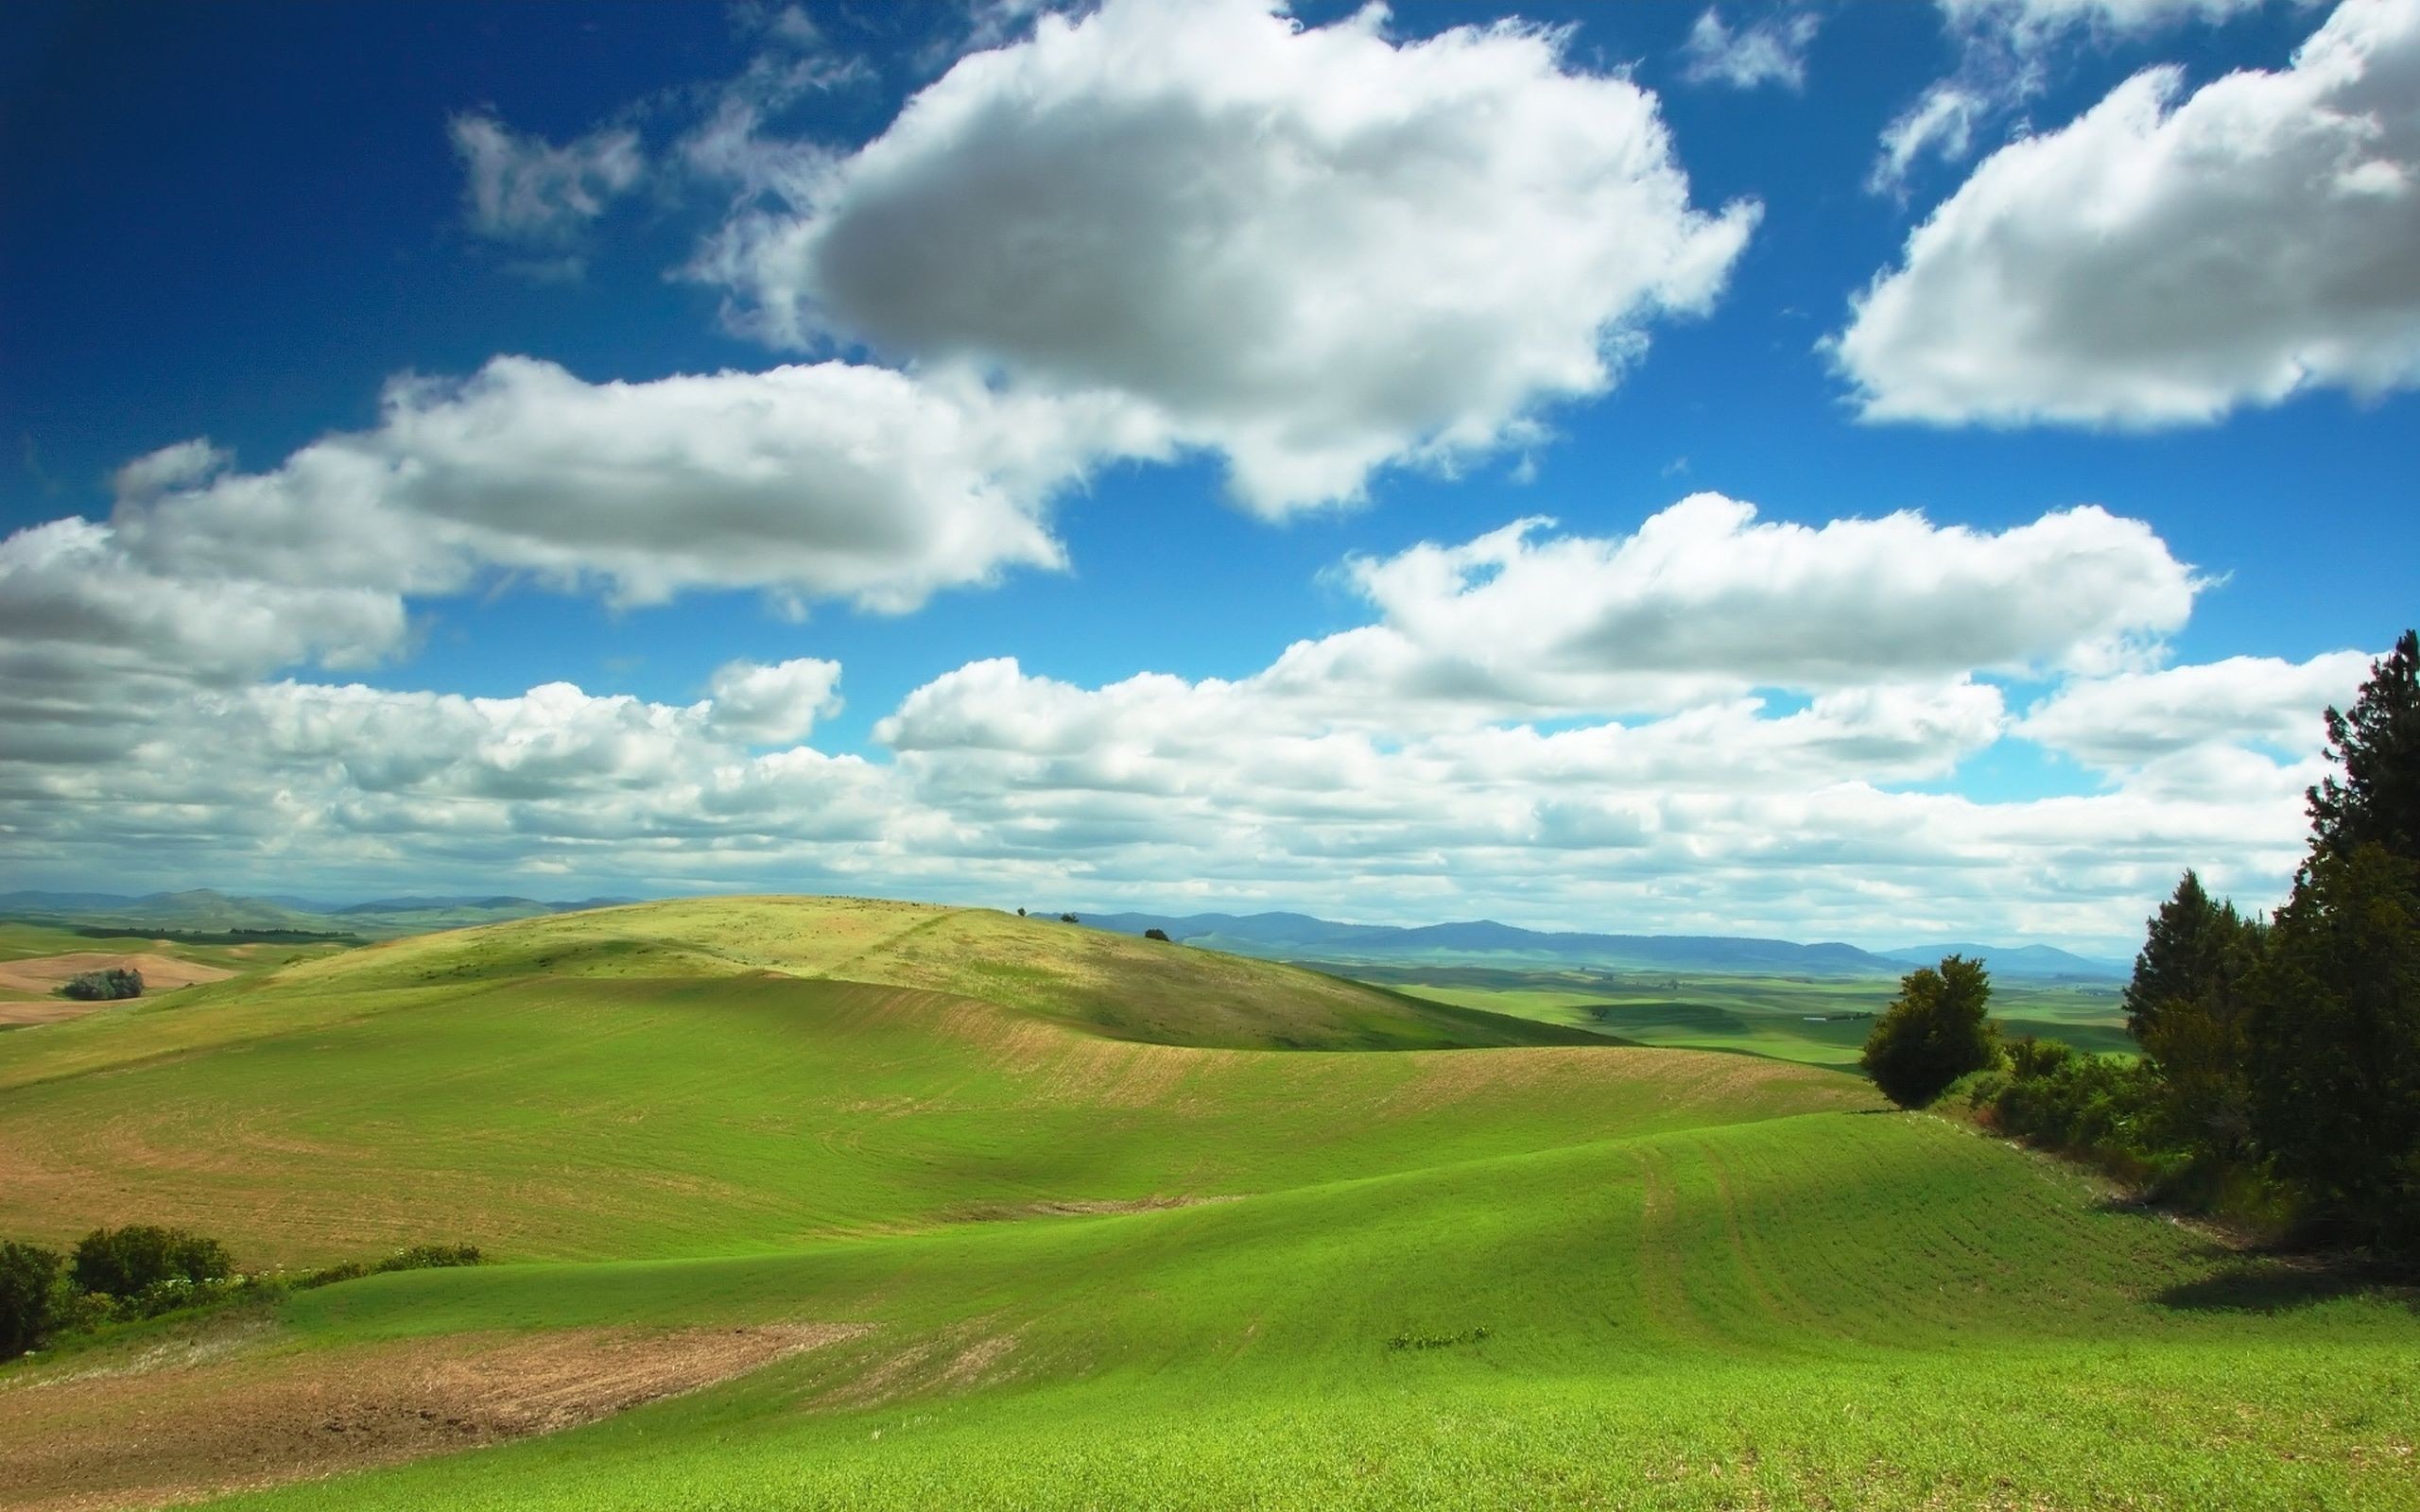 General 2560x1600 sky clouds outdoors nature trees field